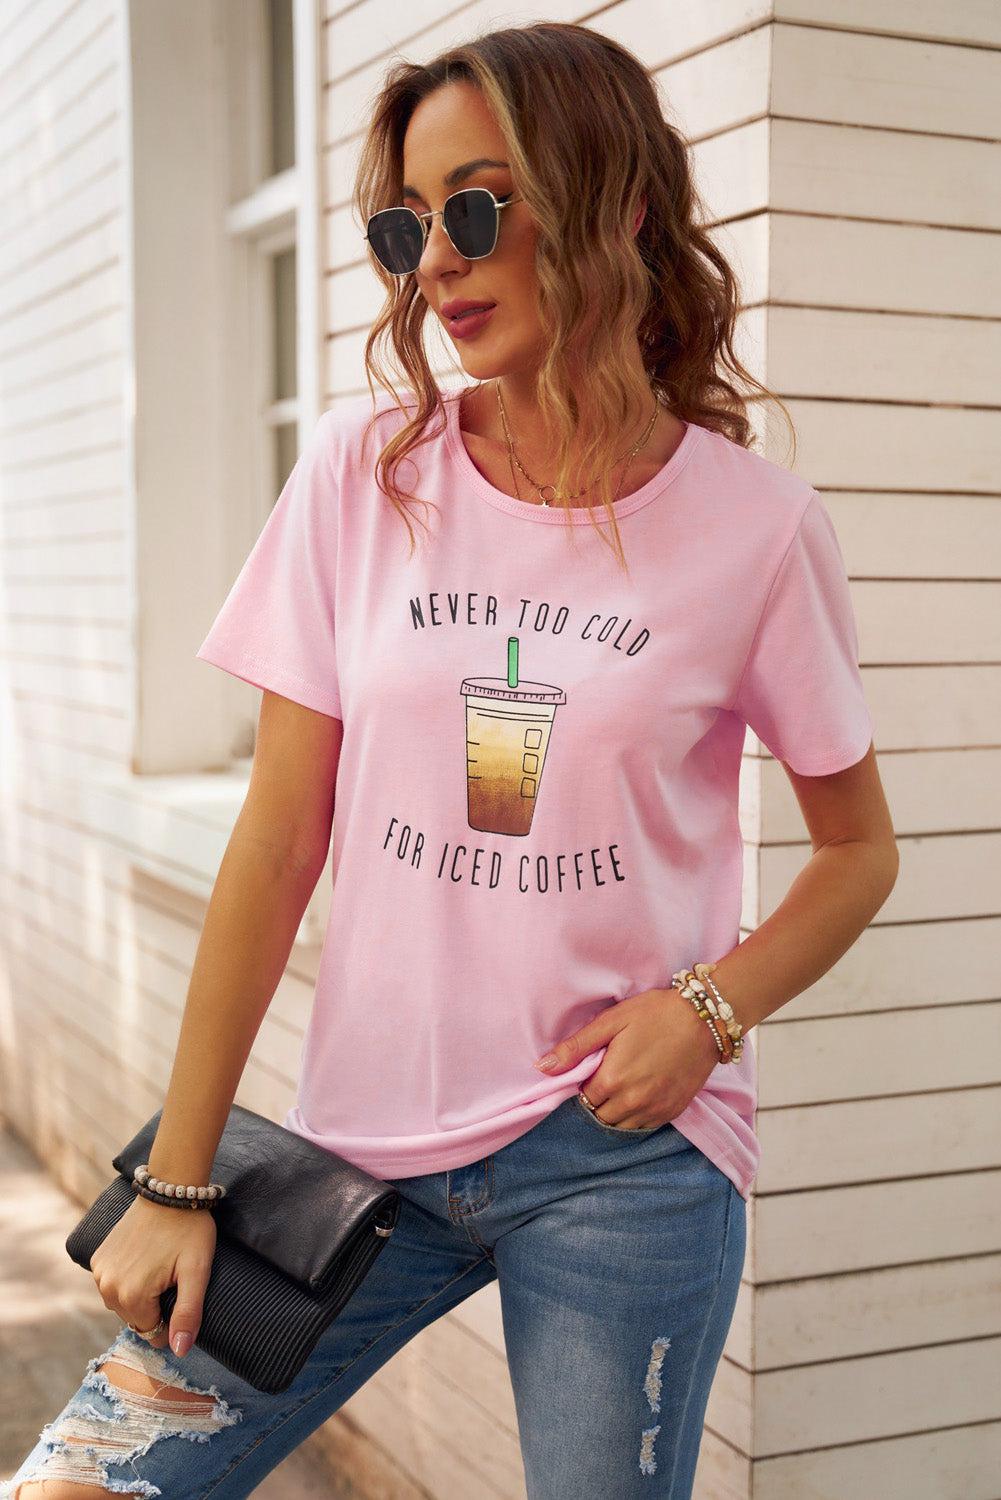 Never Too Cold for Iced Coffee Tee BLUE ZONE PLANET